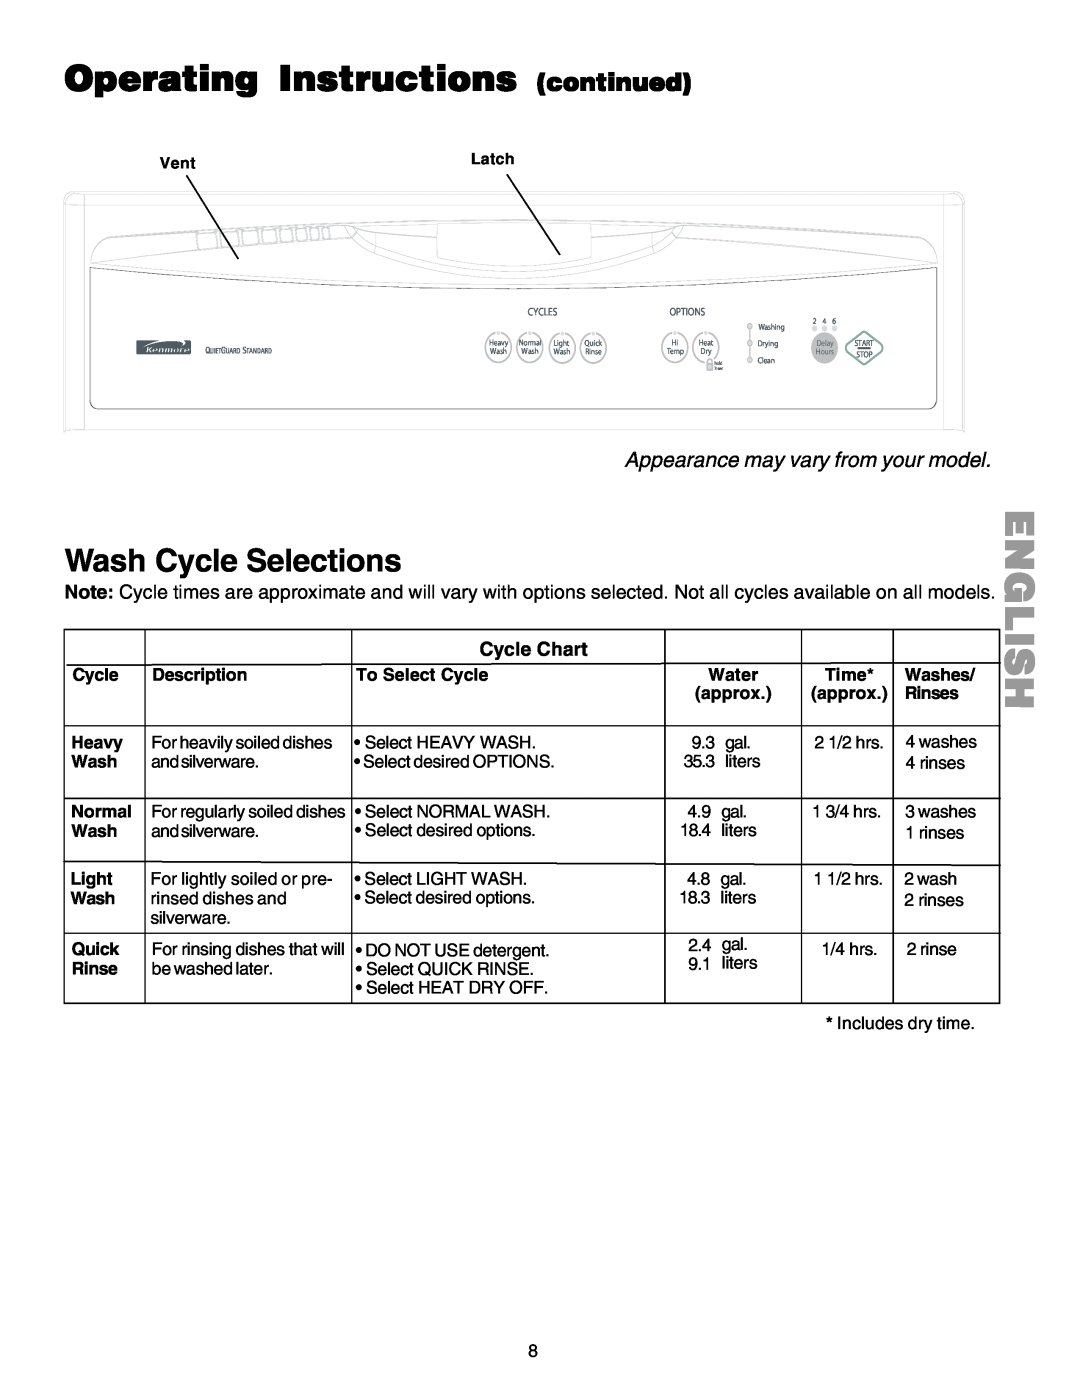 Kenmore 587.1523 Wash Cycle Selections, Appearance may vary from your model, English, Operating Instructions continued 